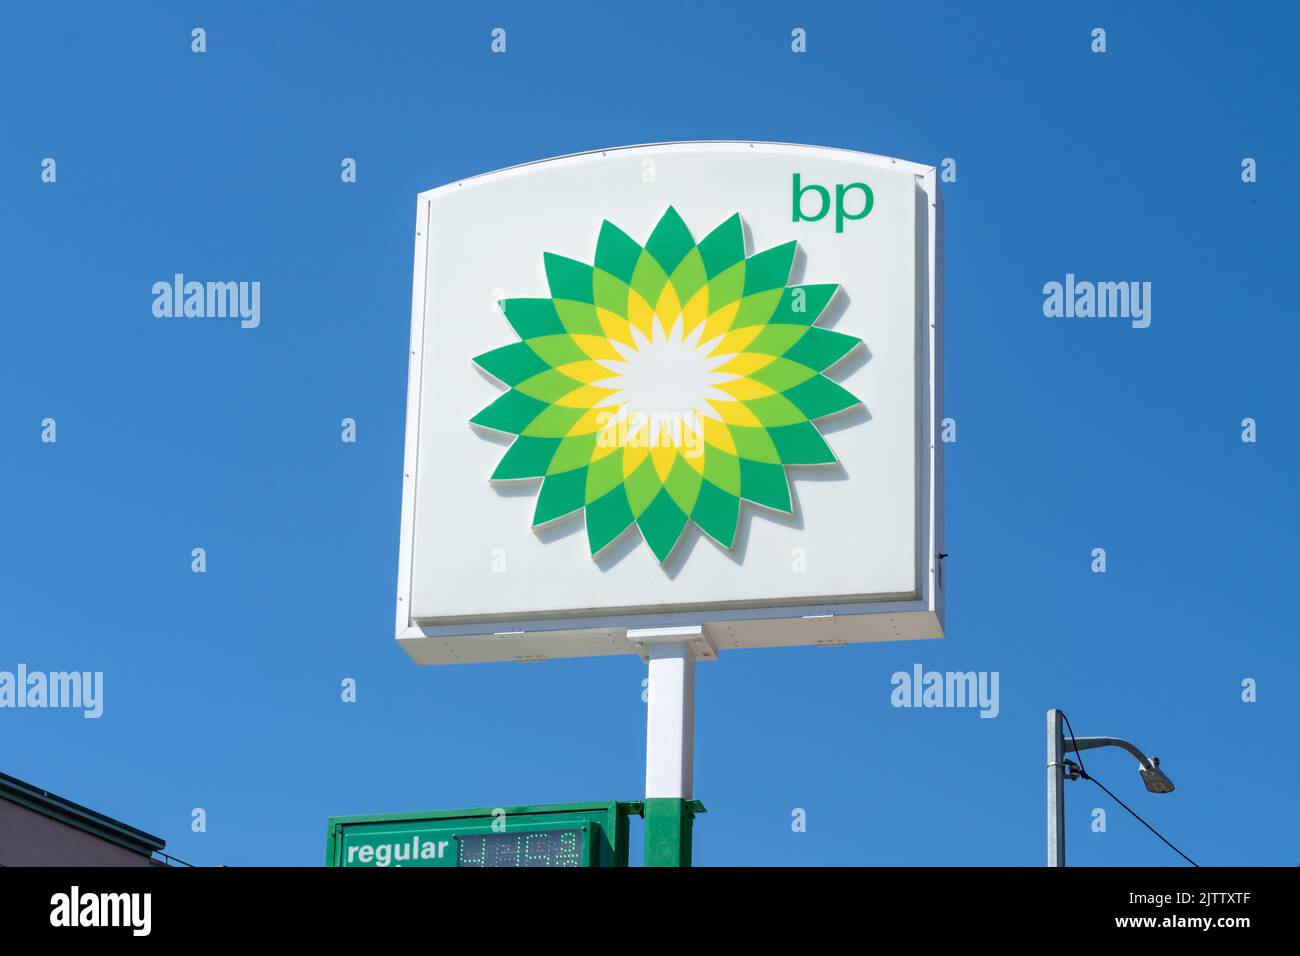 New York City, USA - August 19, 2022: A BP sign with blue sky in background at a gas station New York City, USA Stock Photo